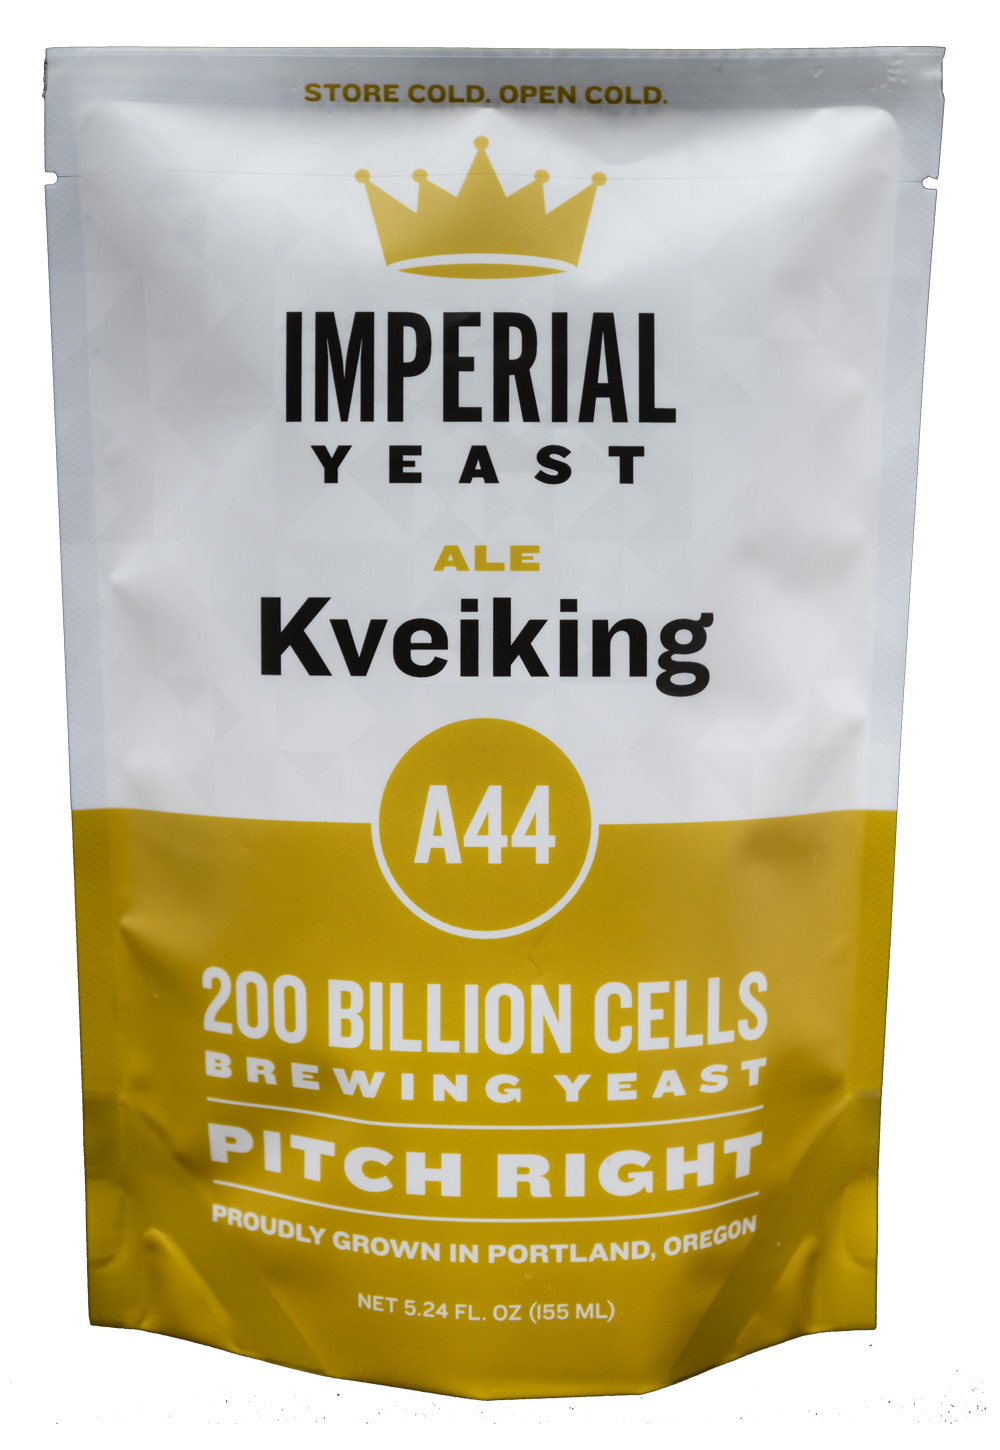 A44 Kveiking Ale Yeast Blend from Imperial Yeast